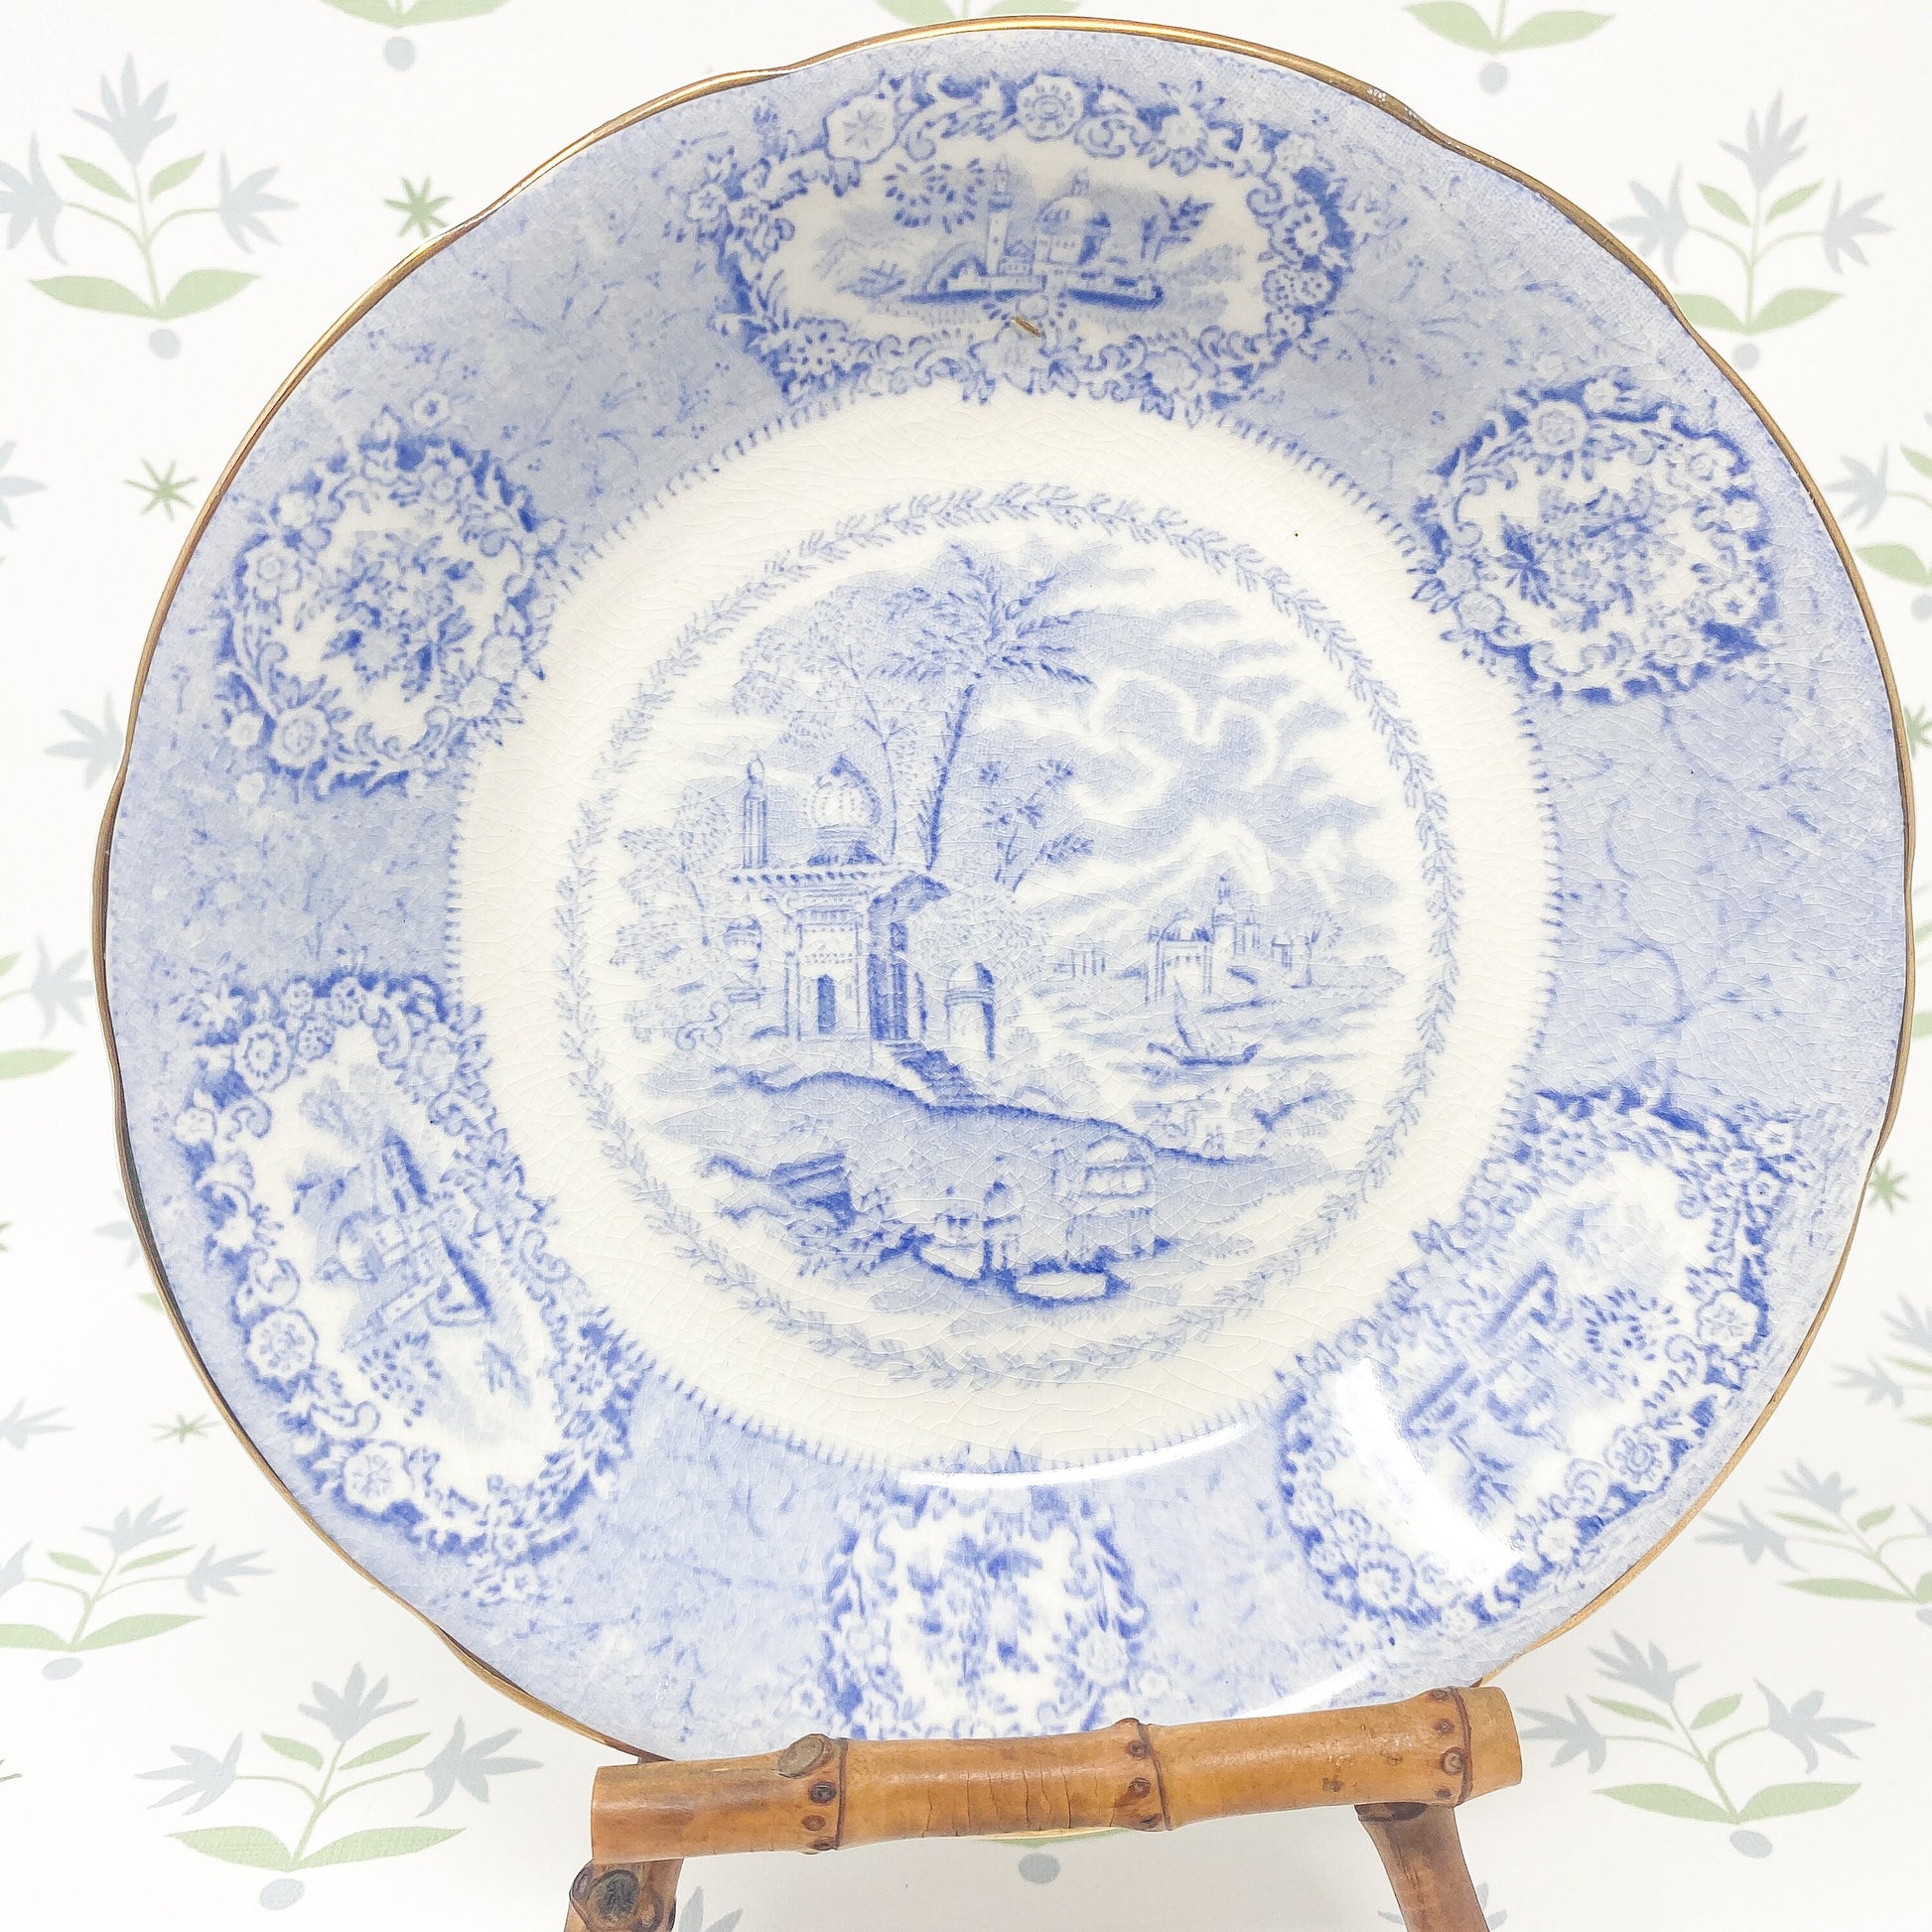 Pair of Antique Ridgway Oriental Staffordshire Bowls - c. 1890 - Blue and White Porcelain Transferware